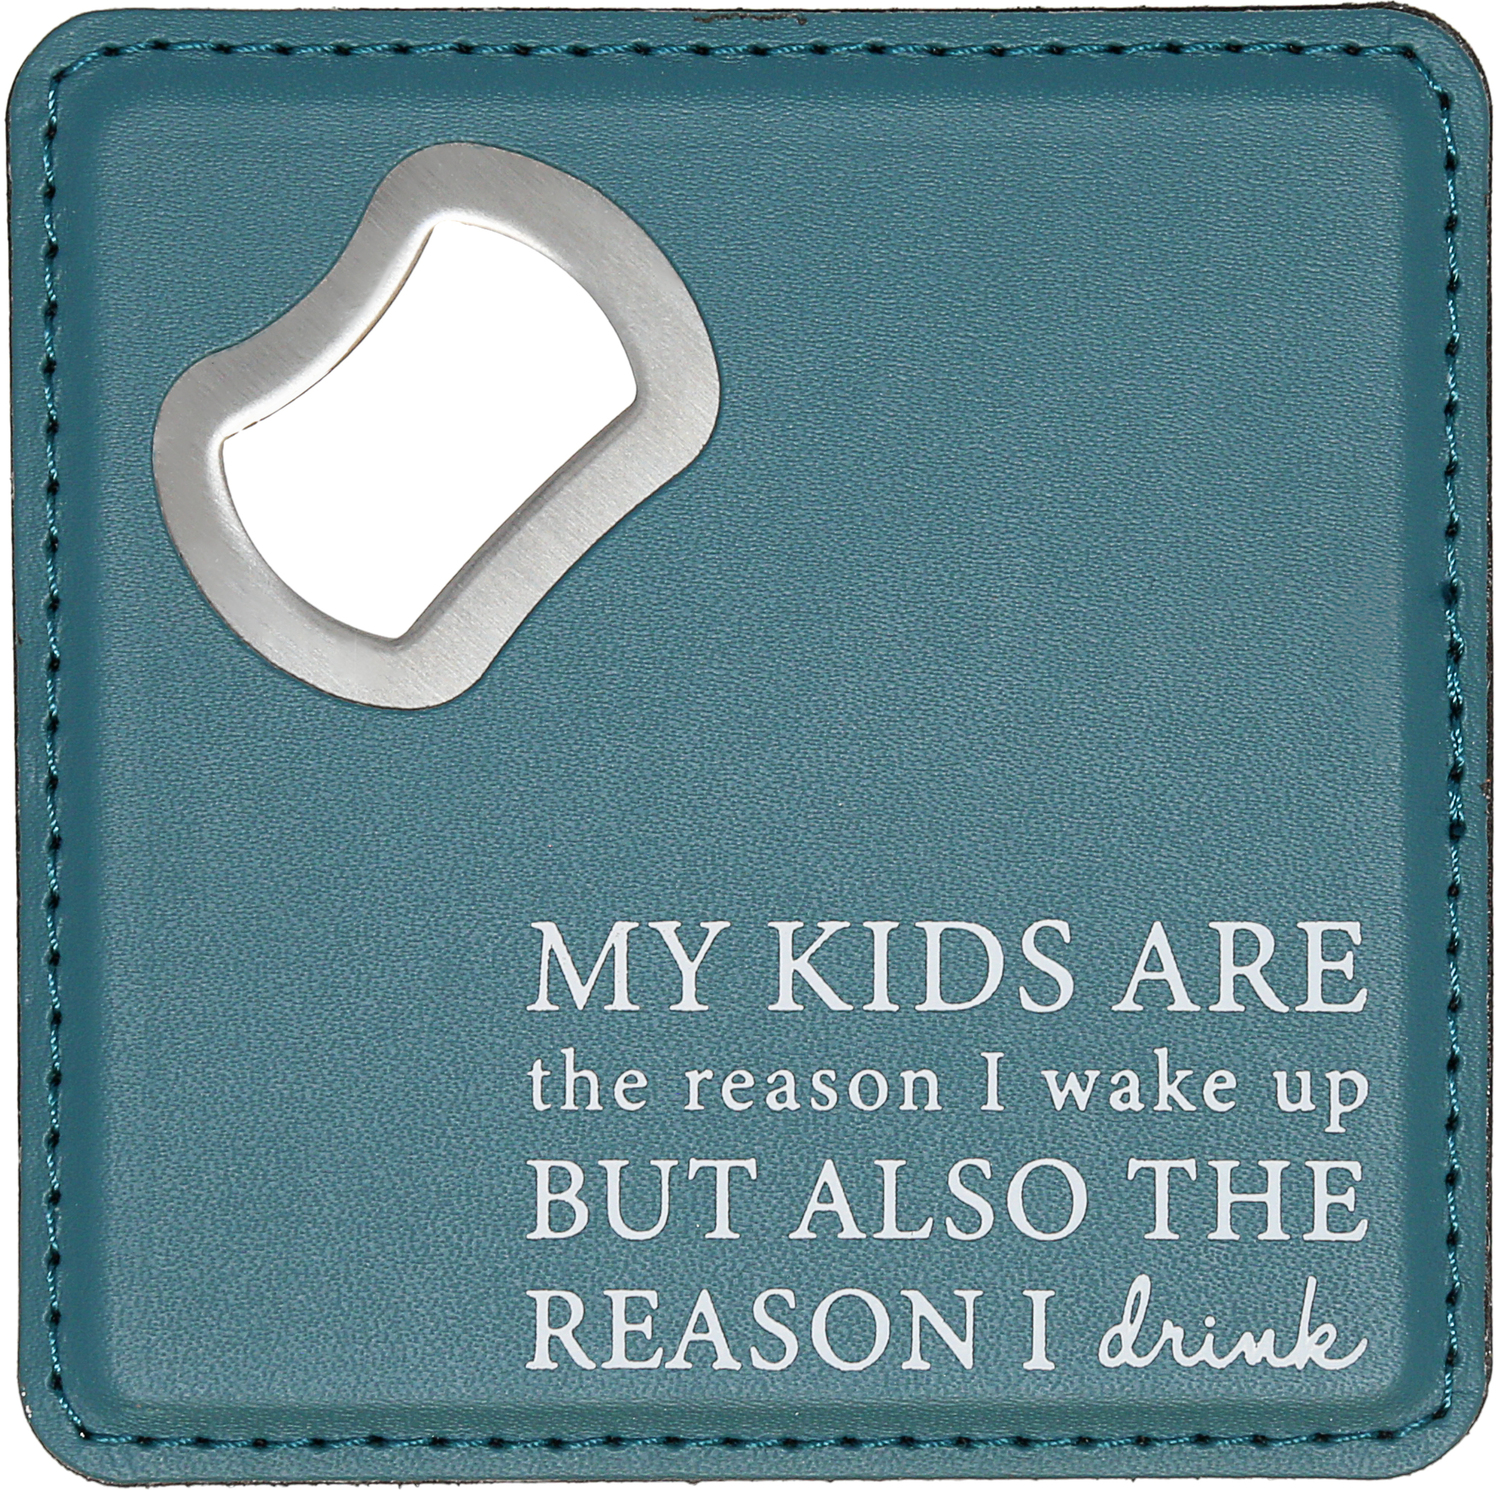 The Reason by A-Parent-ly - The Reason - 4" x 4" Bottle Opener Coaster